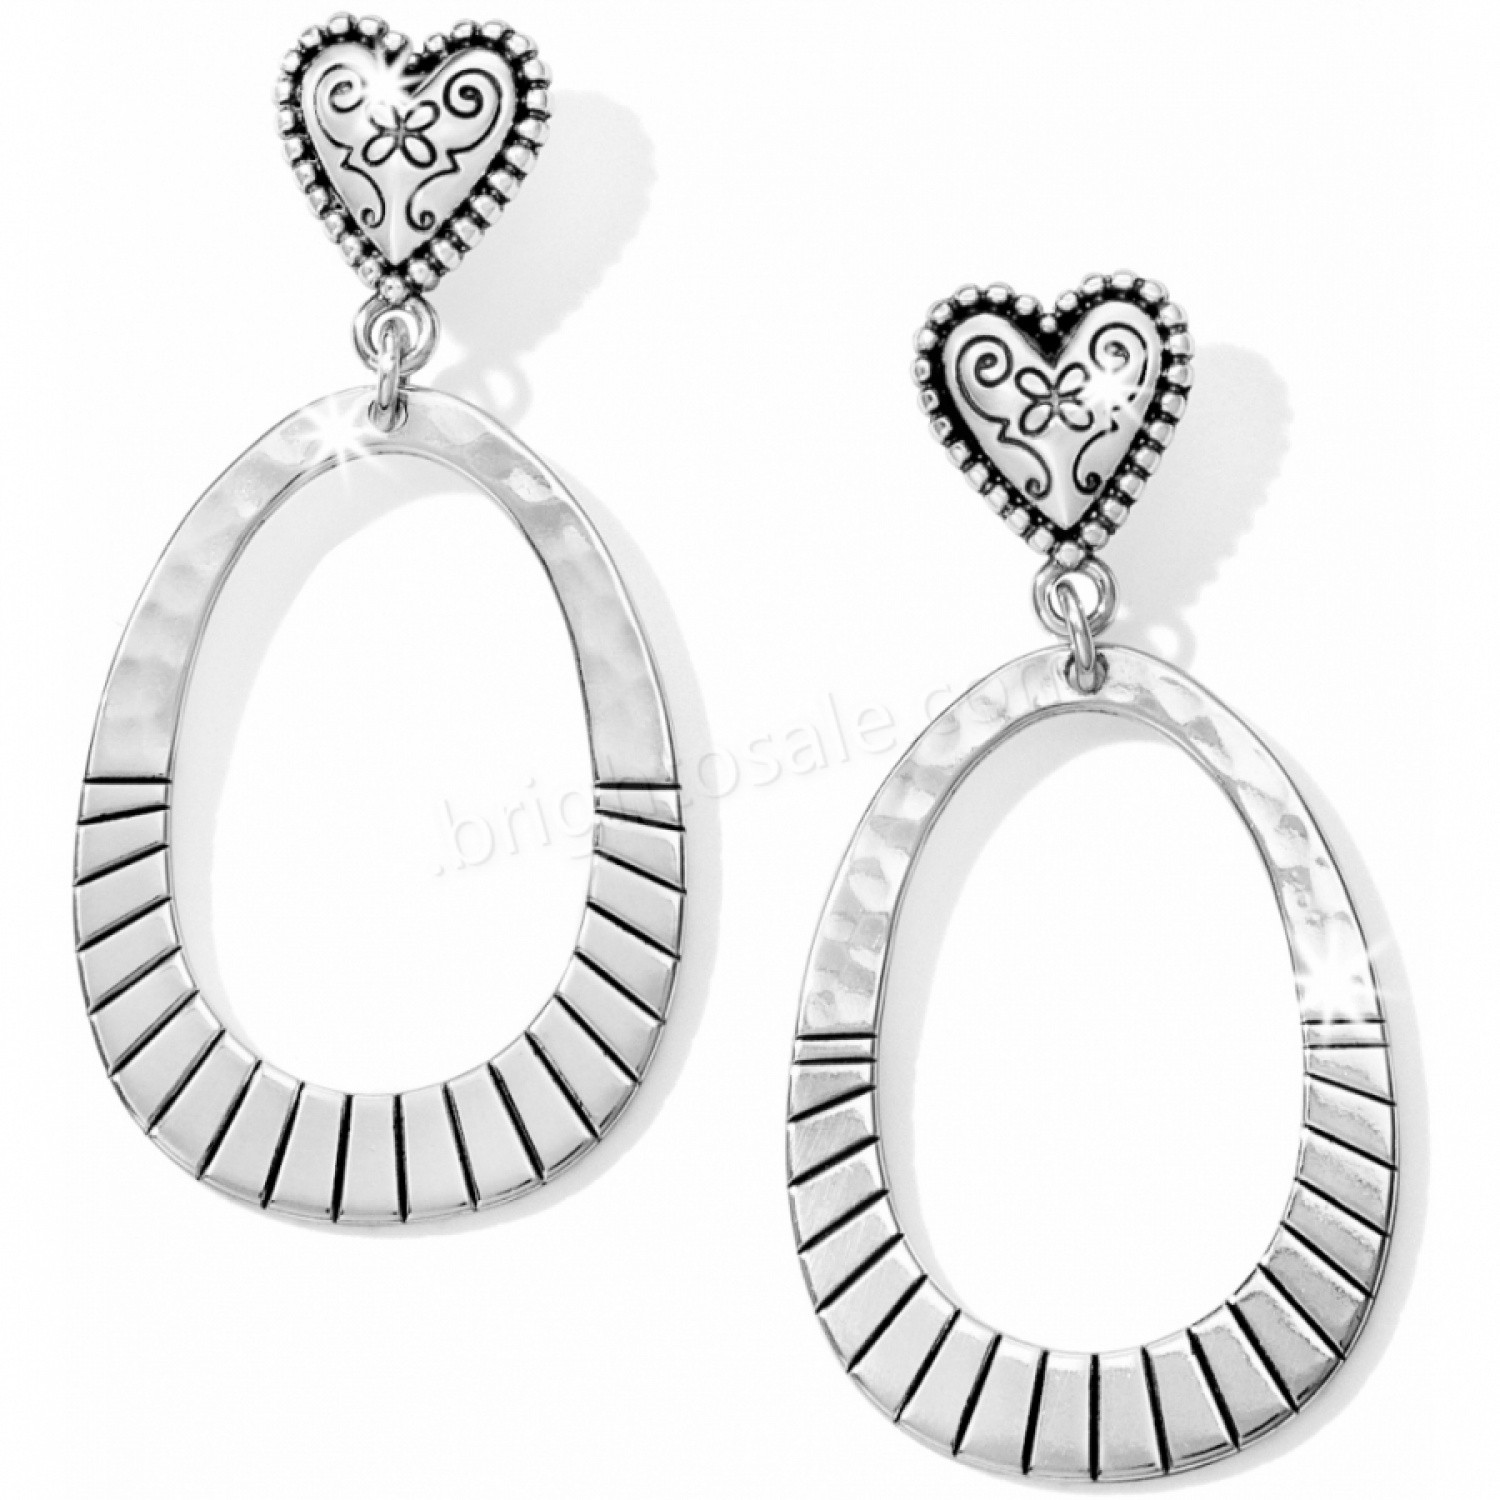 Brighton Collectibles & Online Discount All Your Love Post Drop Earrings - Brighton Collectibles & Online Discount All Your Love Post Drop Earrings